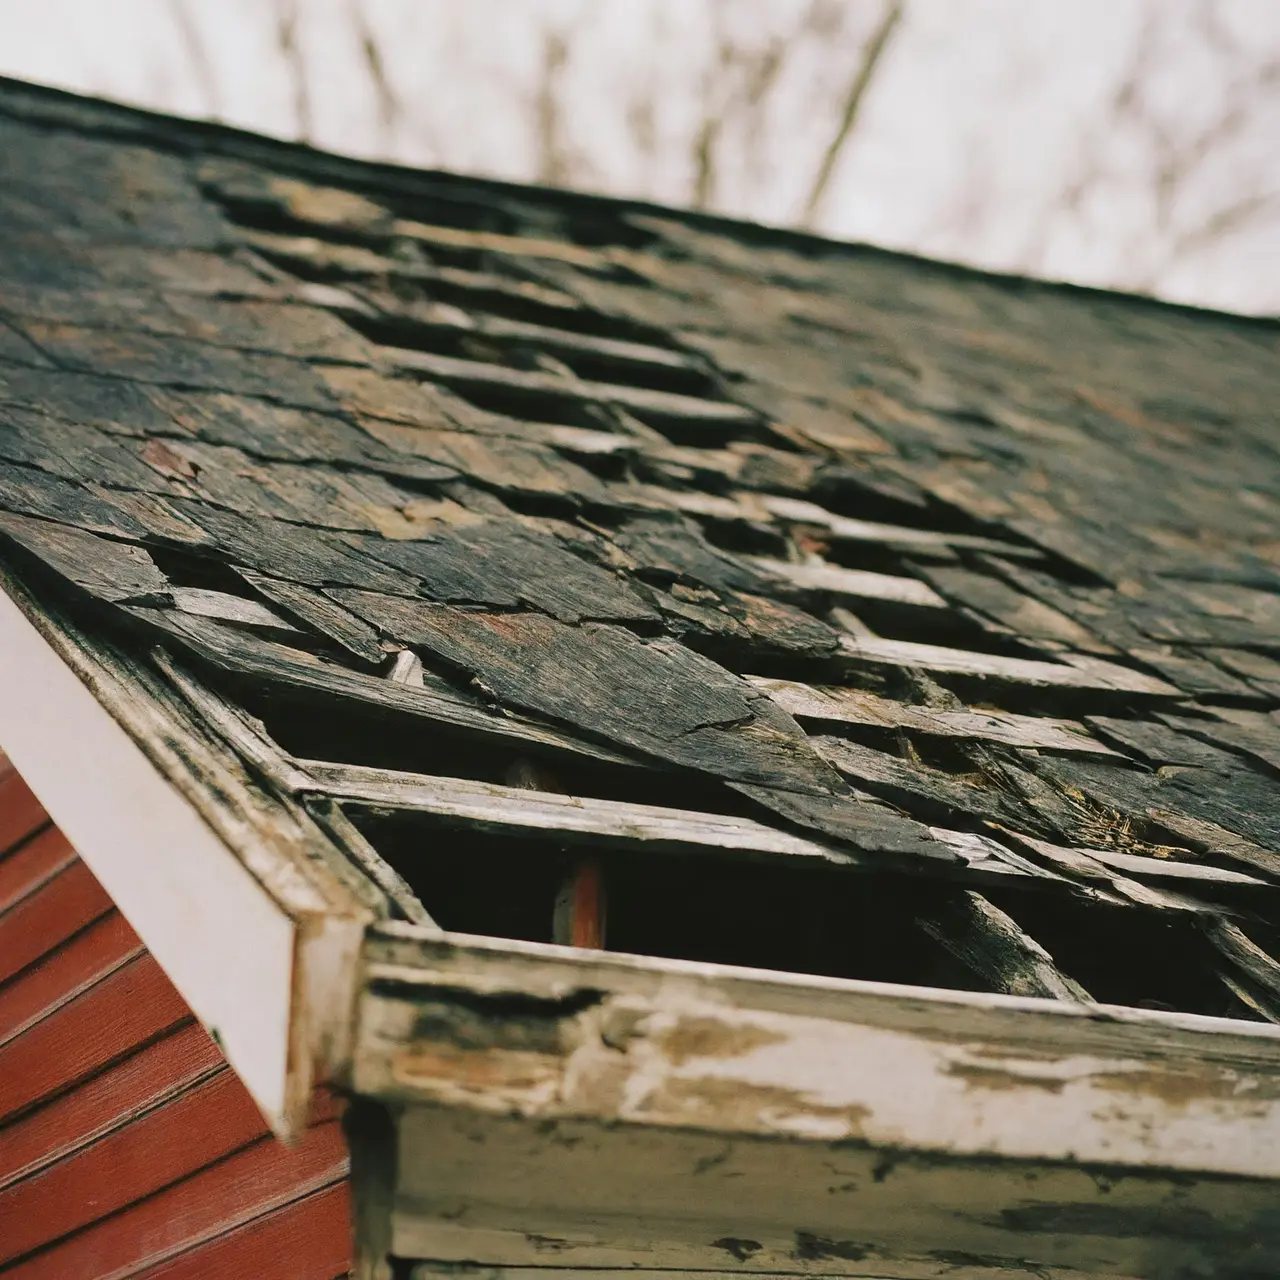 A deteriorating roof with missing shingles on a house. 35mm stock photo